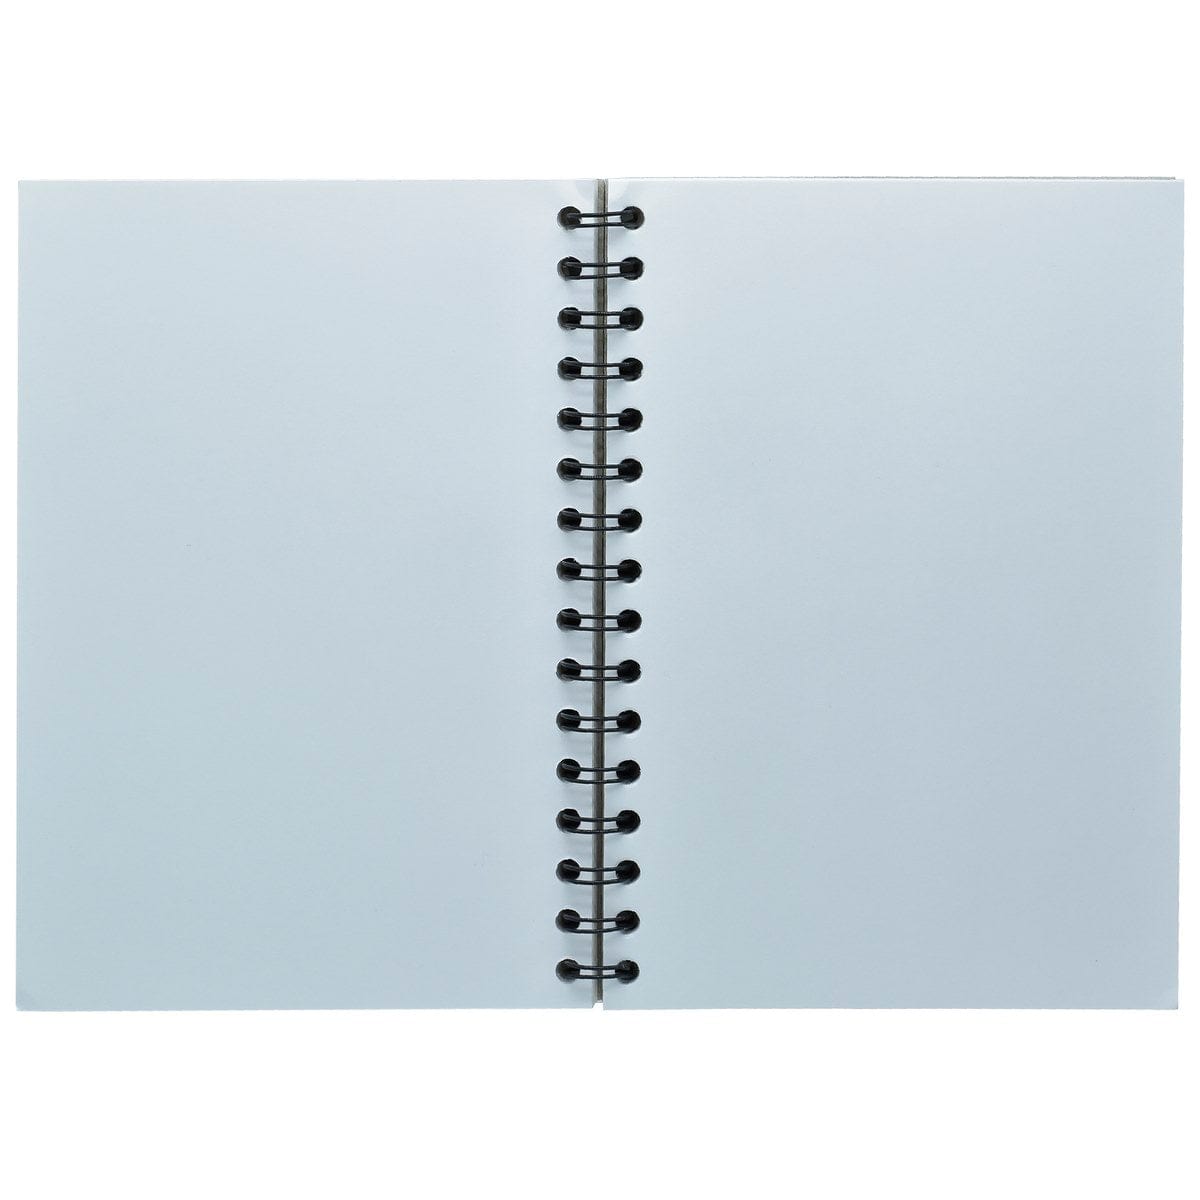 jags-mumbai Notebooks & Diaries Jags Unruled Notebook Wiro 192Sheet 96Pages 80Gsm A5 JCCPA5